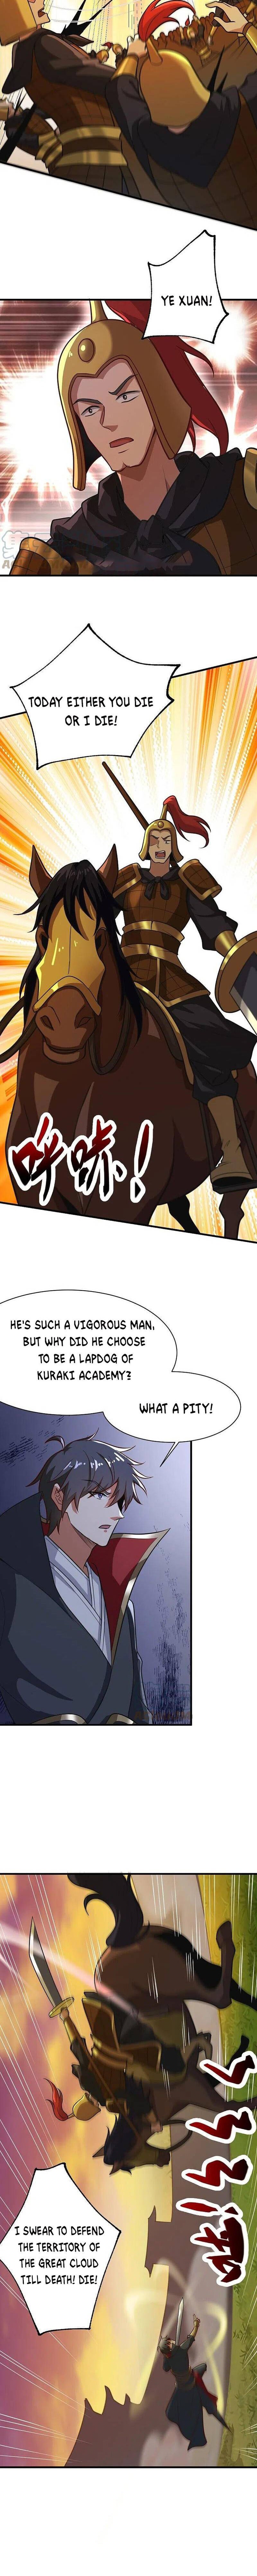 One Sword Reigns Supreme Chapter 226 Page 3